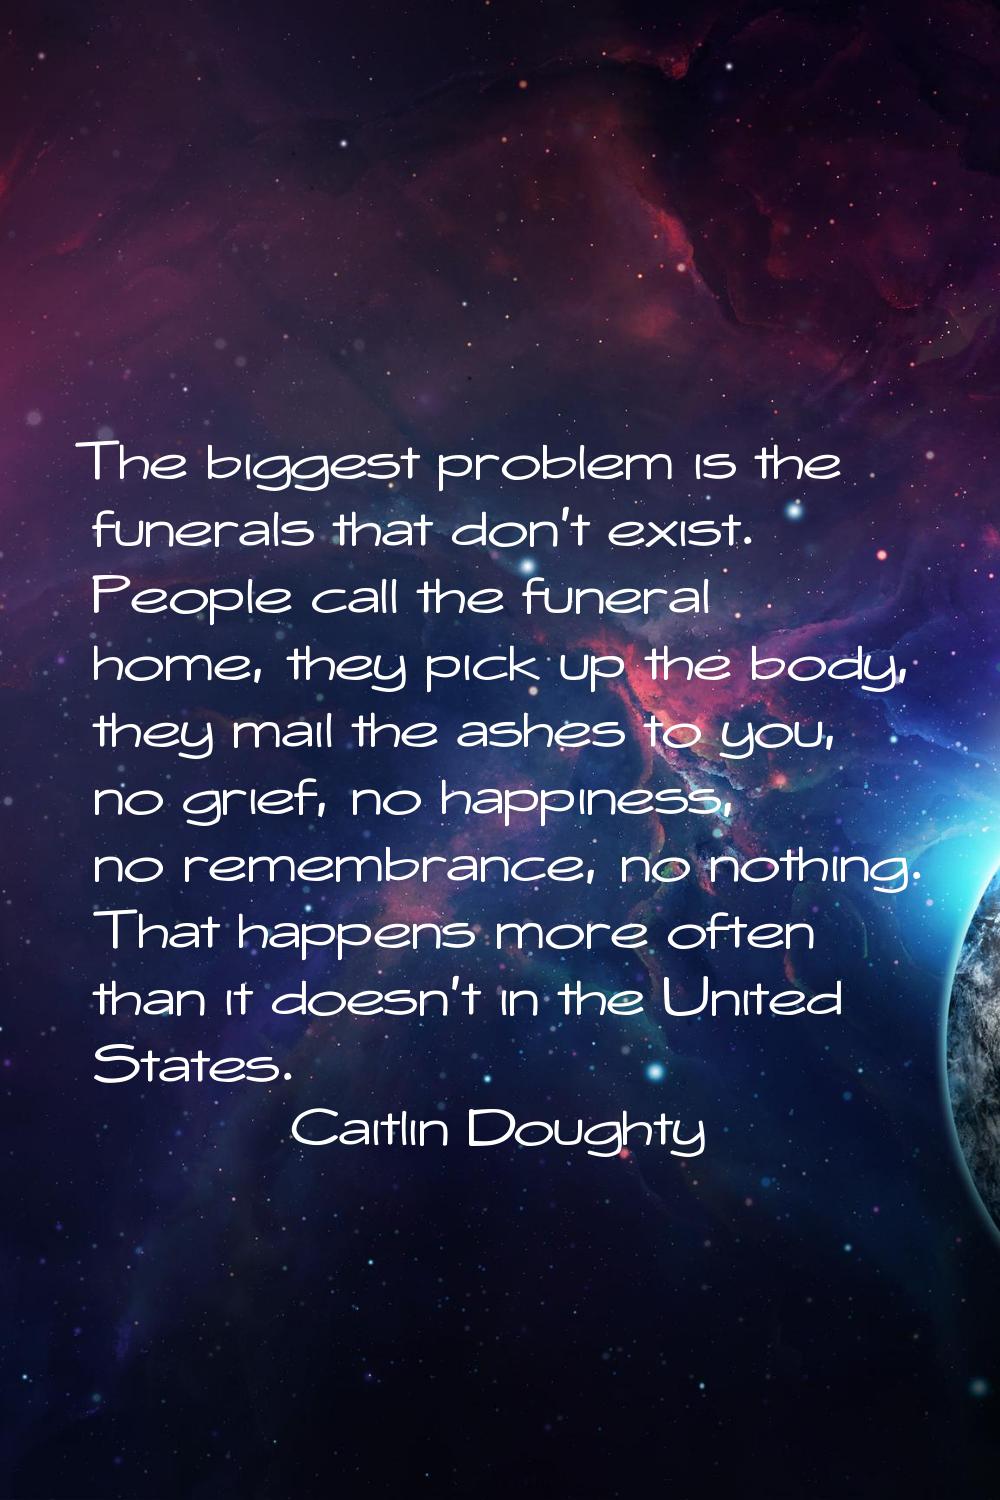 The biggest problem is the funerals that don't exist. People call the funeral home, they pick up th